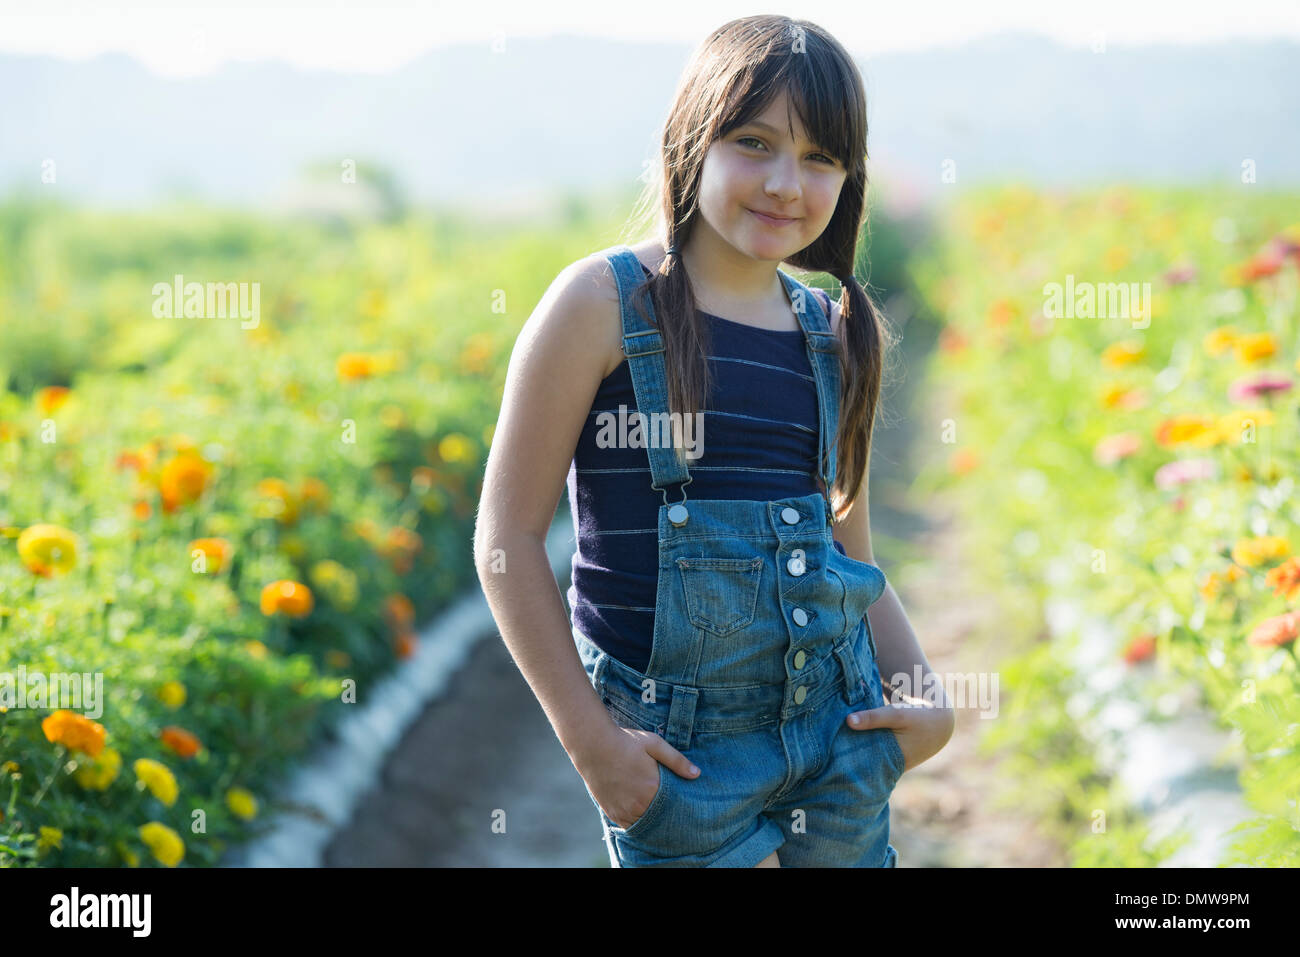 Summer on an organic farm. A young girl in a field of flowers. Stock Photo